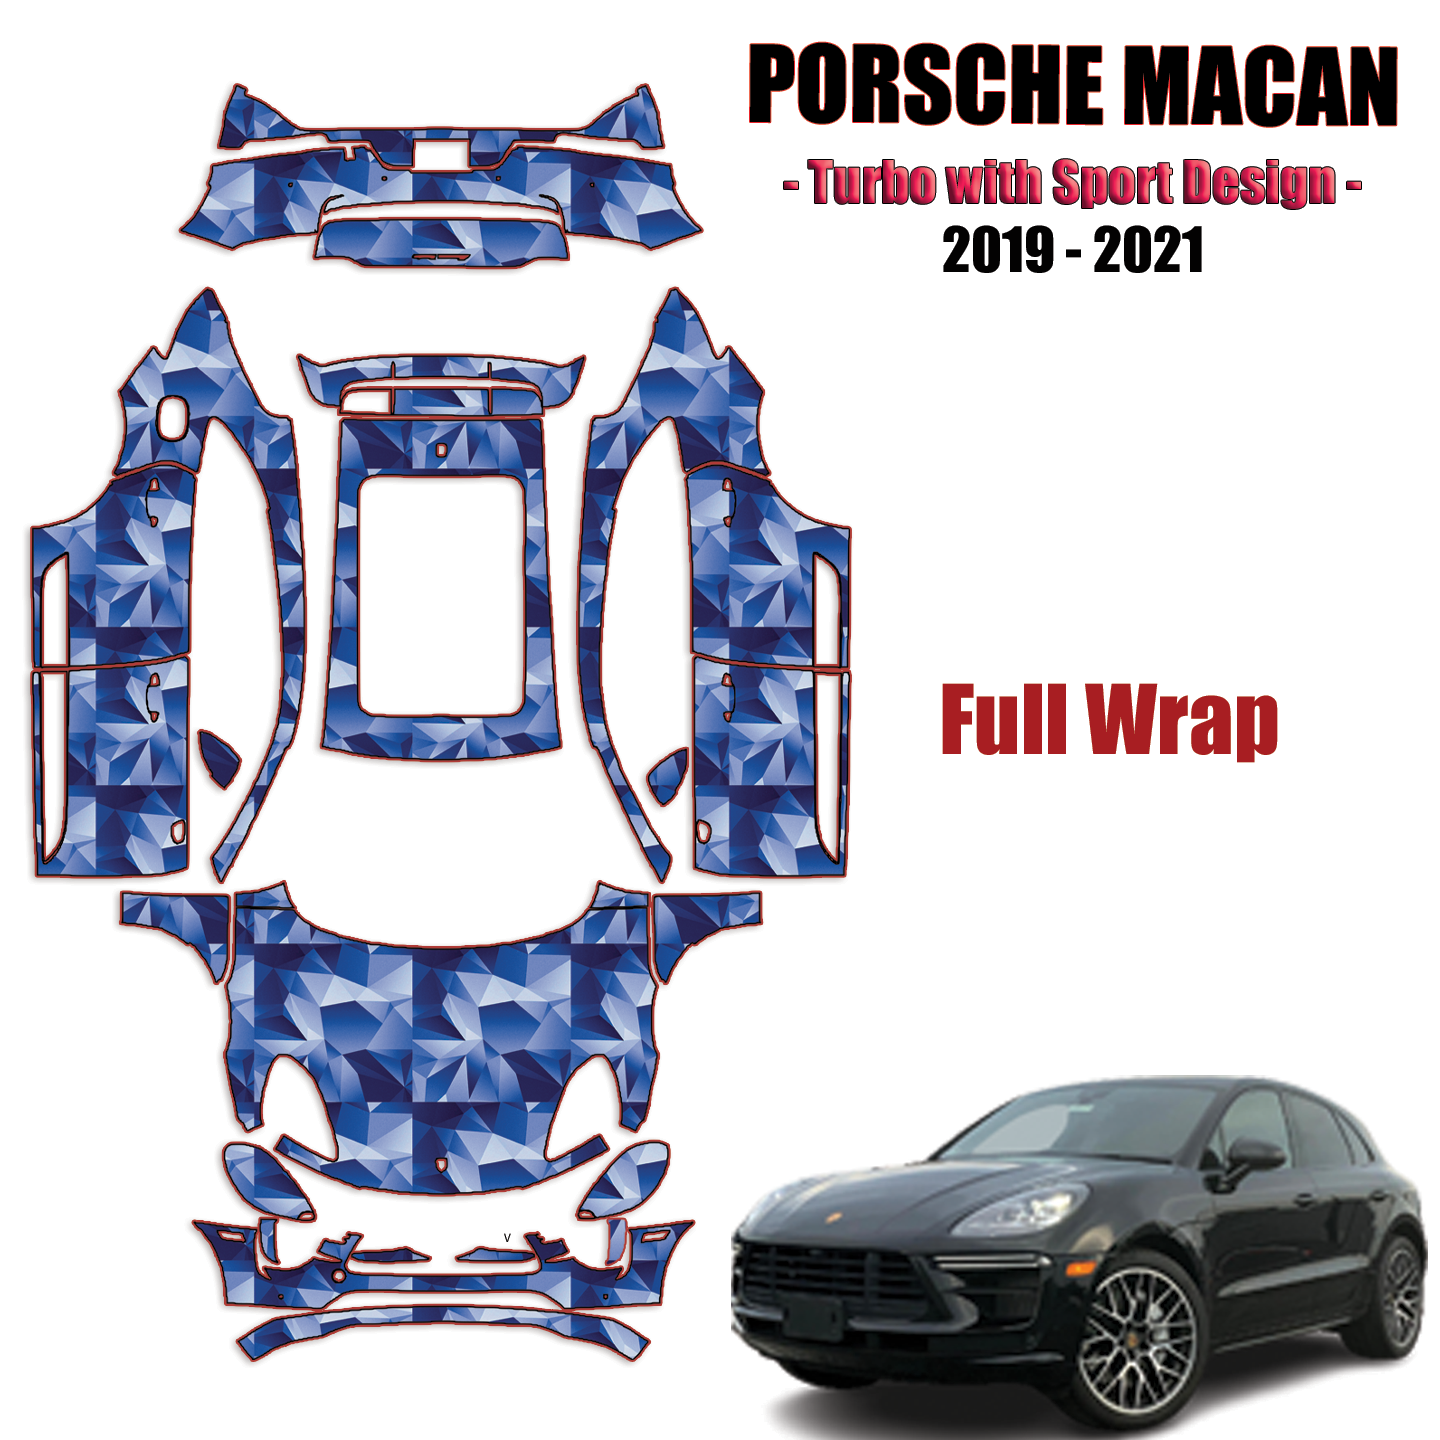 2019-2021 Porsche Macan – Turbo with Sport Design Paint Protection Kit – Full Wrap Vehicle